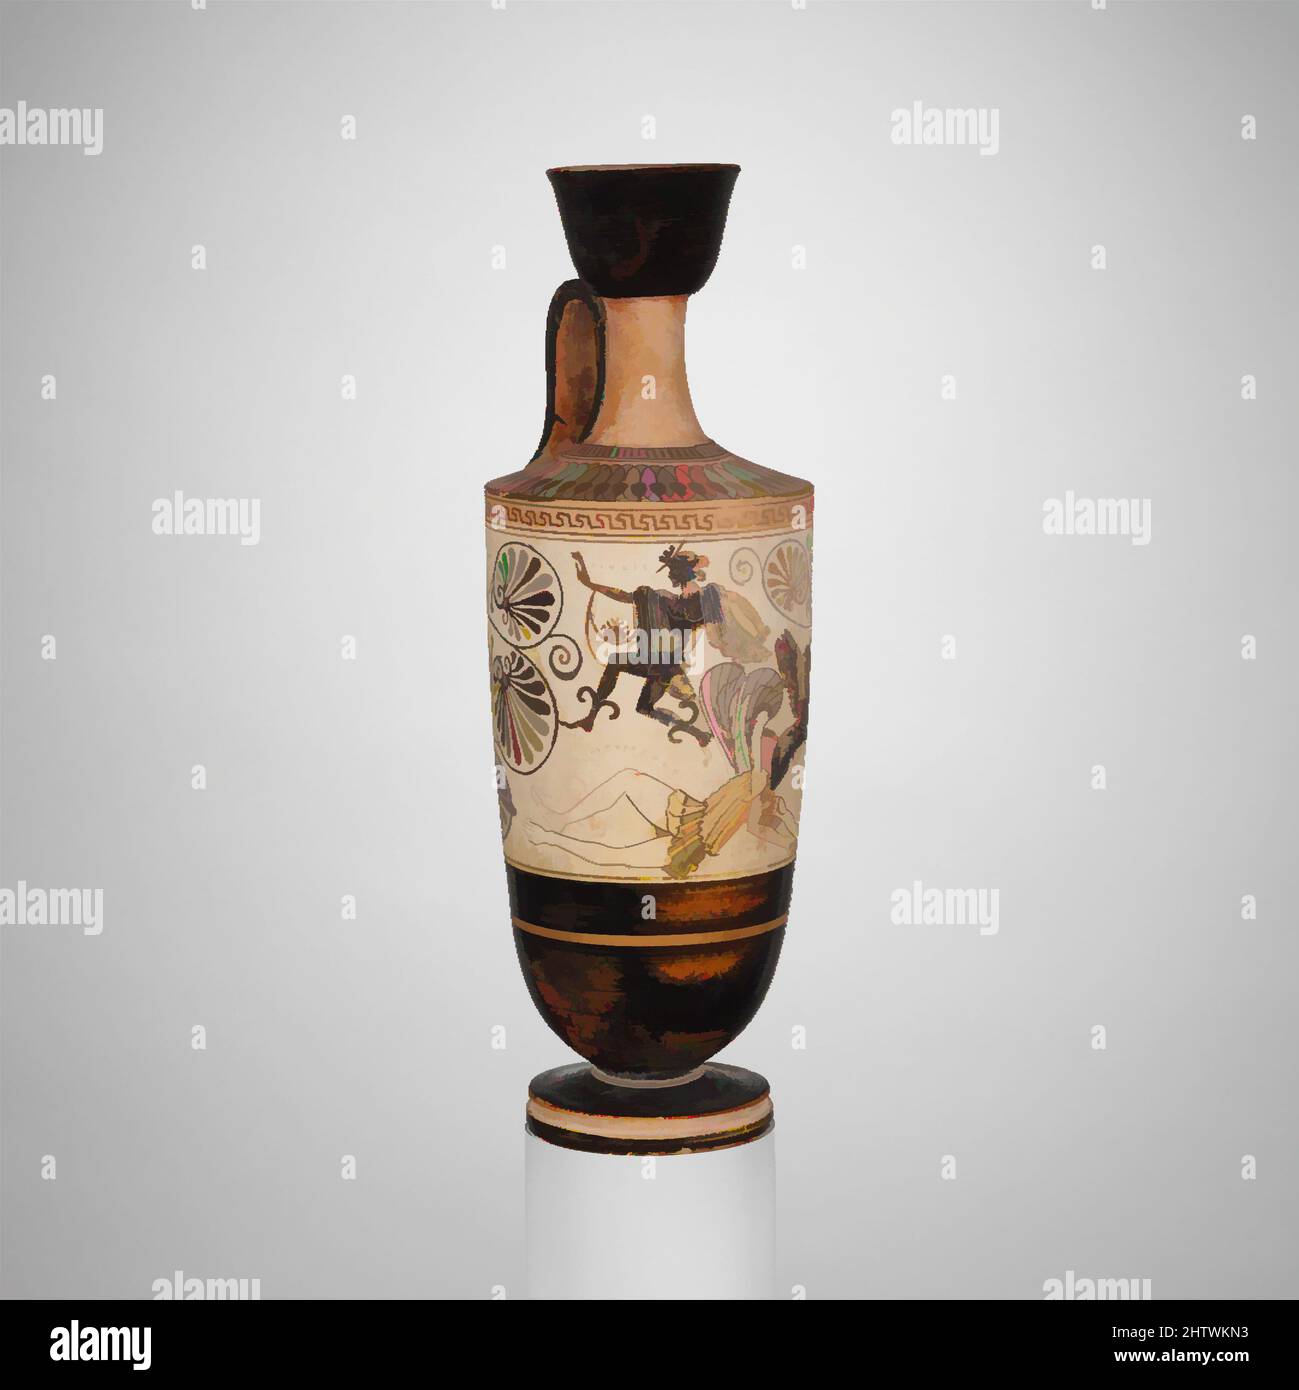 Art inspired by Terracotta lekythos (oil flask), Archaic, ca. 500 B.C., Greek, Attic, Terracotta; black-figure, white-ground, 9 5/8in. (24.5cm), Vases, Perseus flying away with the head of Medusa, while Pegasos springs from her severed neck. Perseus, son of the god Zeus and the human, Classic works modernized by Artotop with a splash of modernity. Shapes, color and value, eye-catching visual impact on art. Emotions through freedom of artworks in a contemporary way. A timeless message pursuing a wildly creative new direction. Artists turning to the digital medium and creating the Artotop NFT Stock Photo